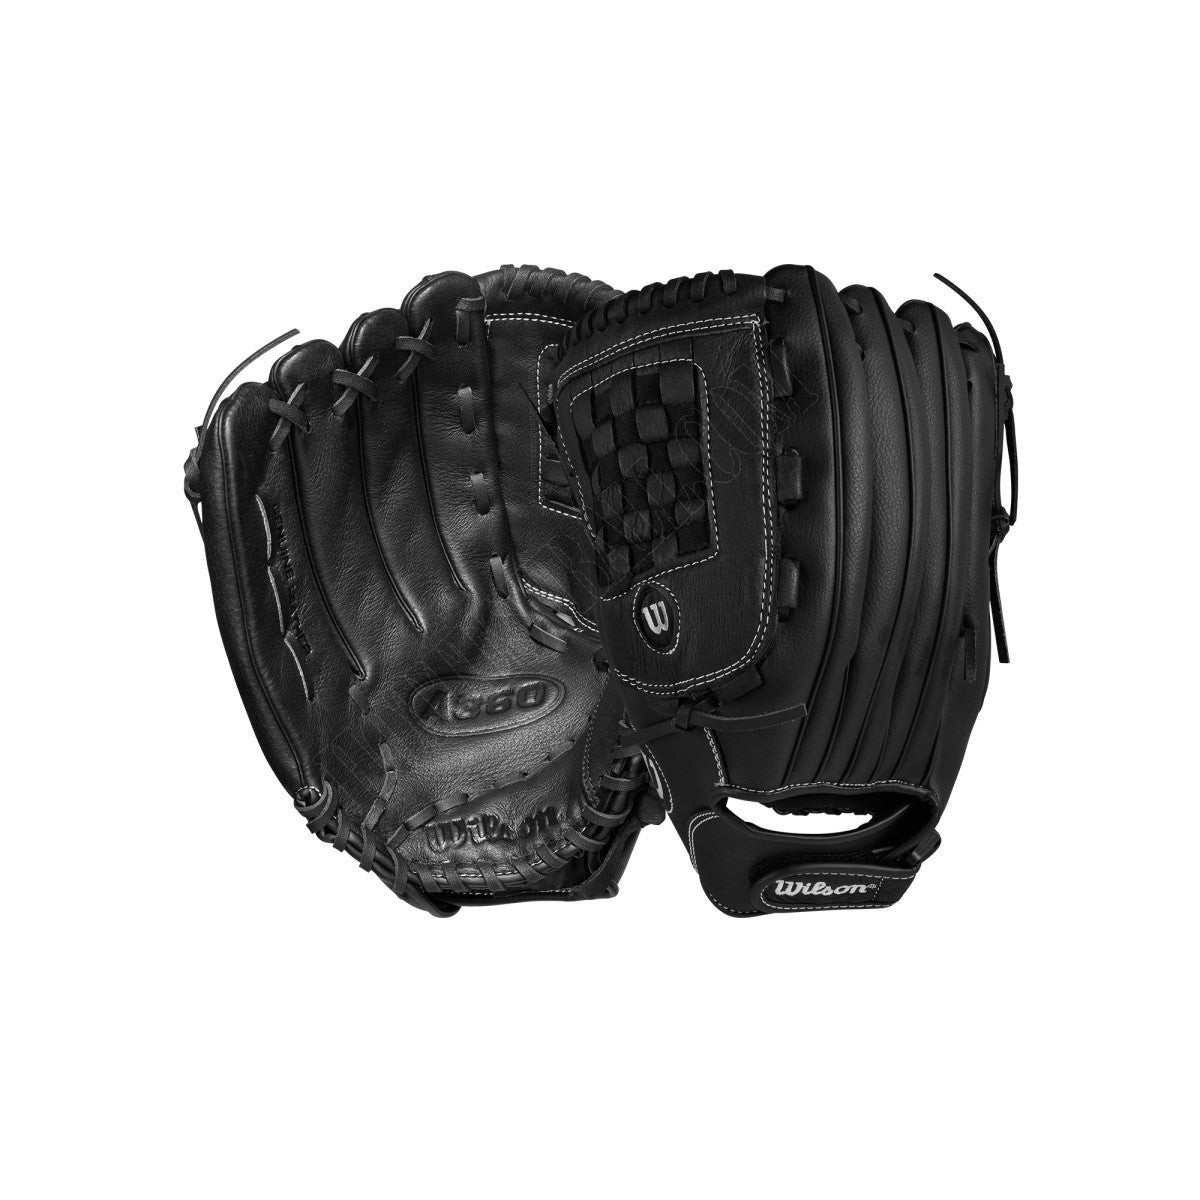 A360 14" Slowpitch Glove - Left Hand Throw ● Wilson Promotions - -0